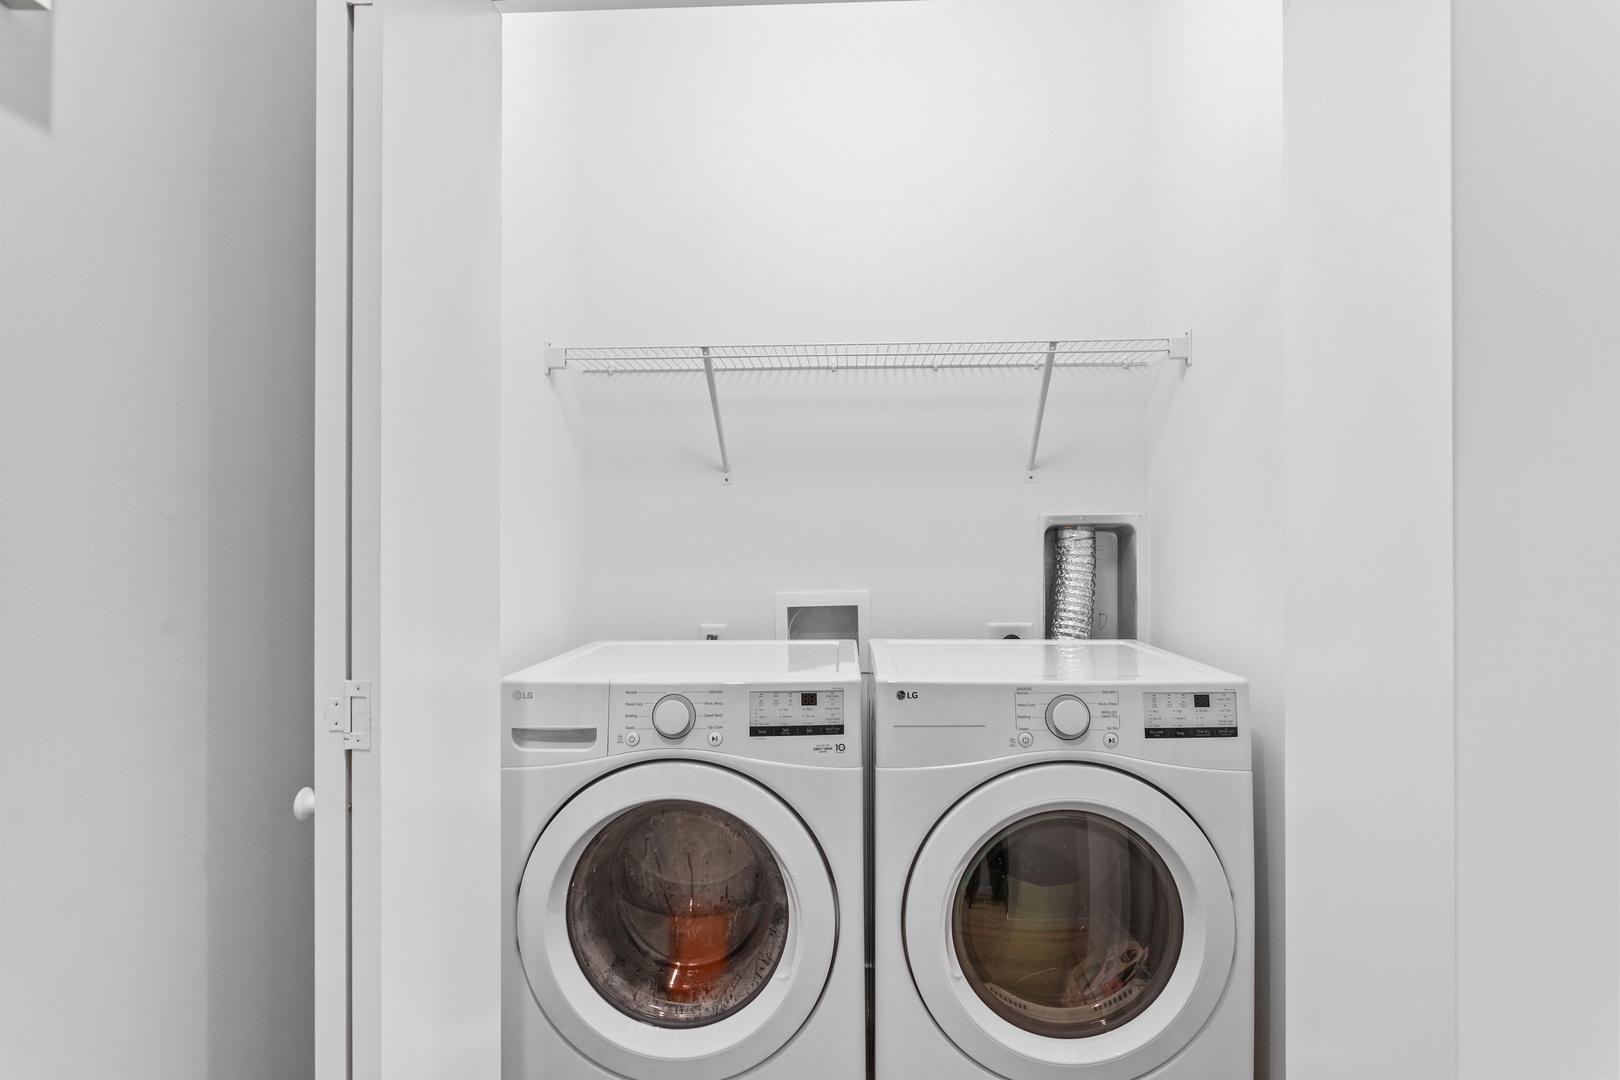 The washer and dryer